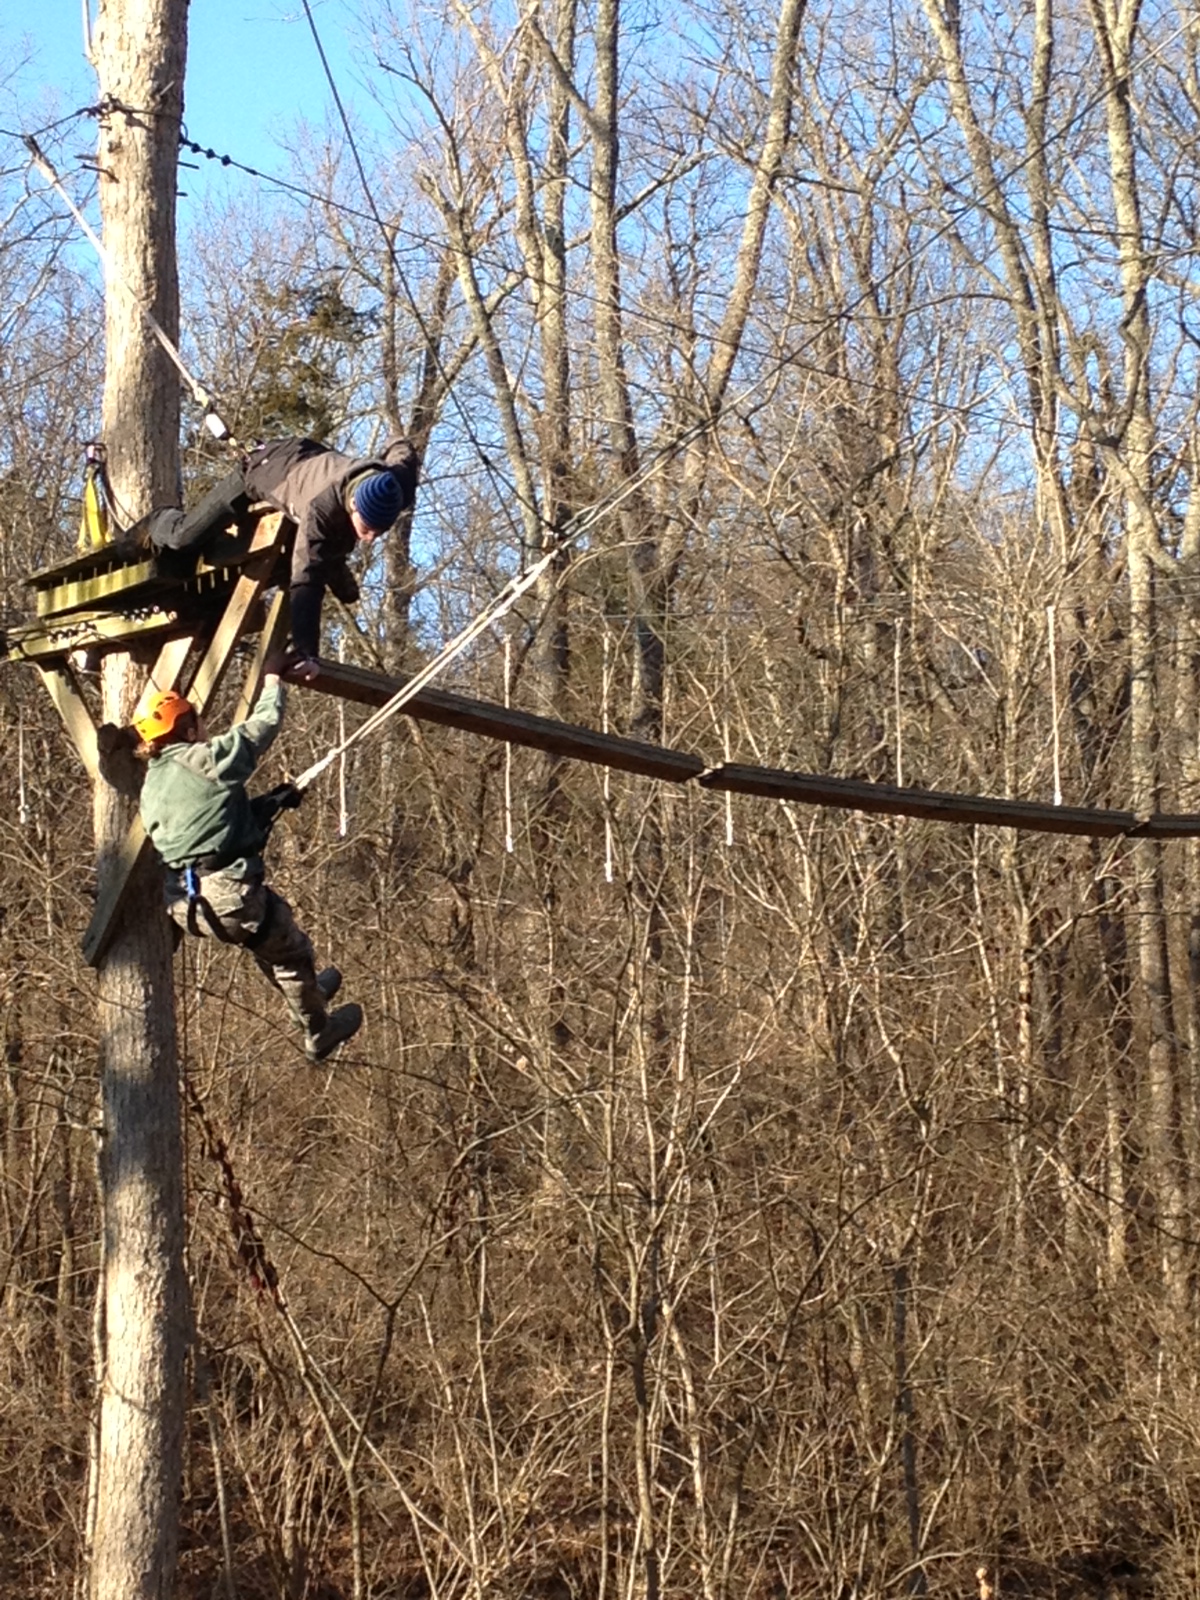 Cadet Garstang descends from through the Asbury Ropes Course via the 50ft tall swing.